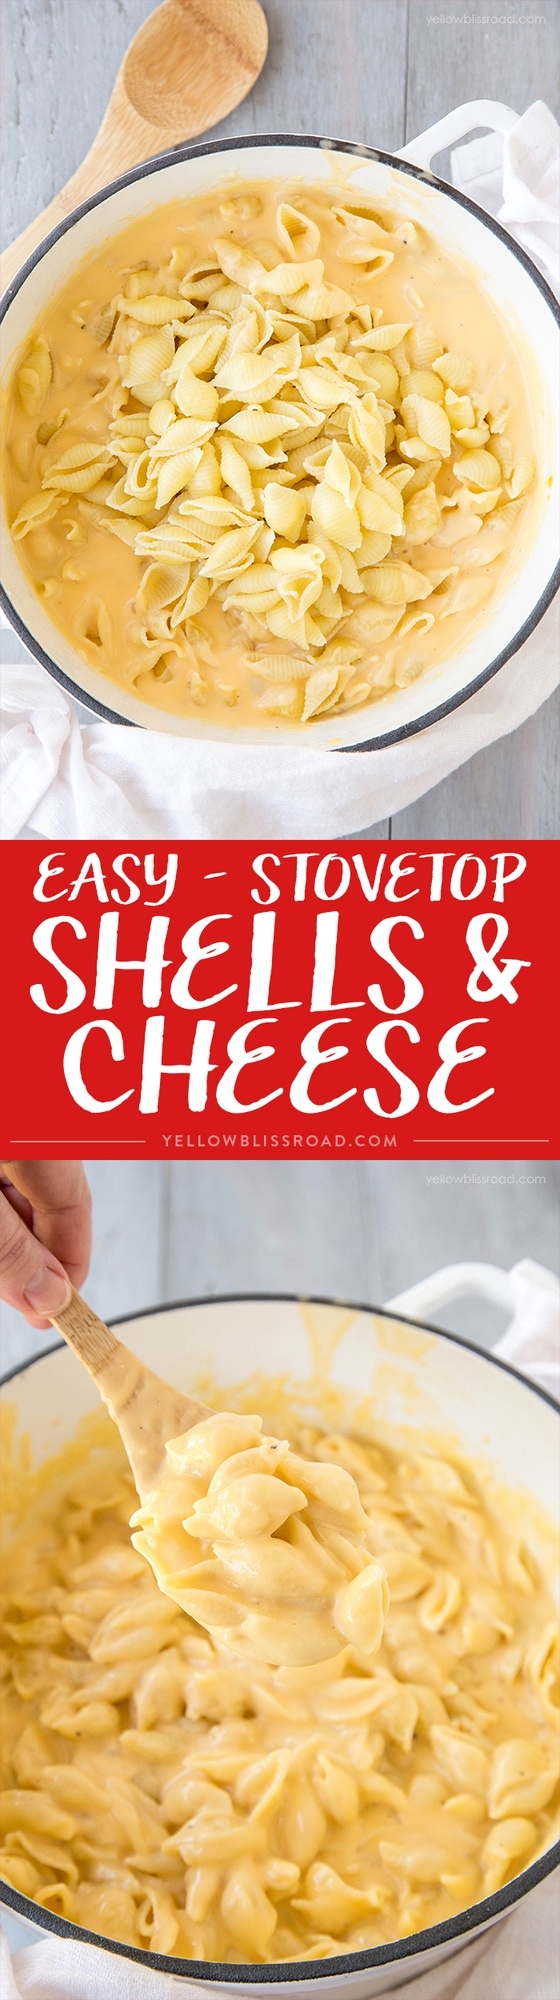 Easy, Cheesy Stovetop Shells & Cheese - The best Macaroni & Cheese Recipe that will make you ditch the blue box forever!